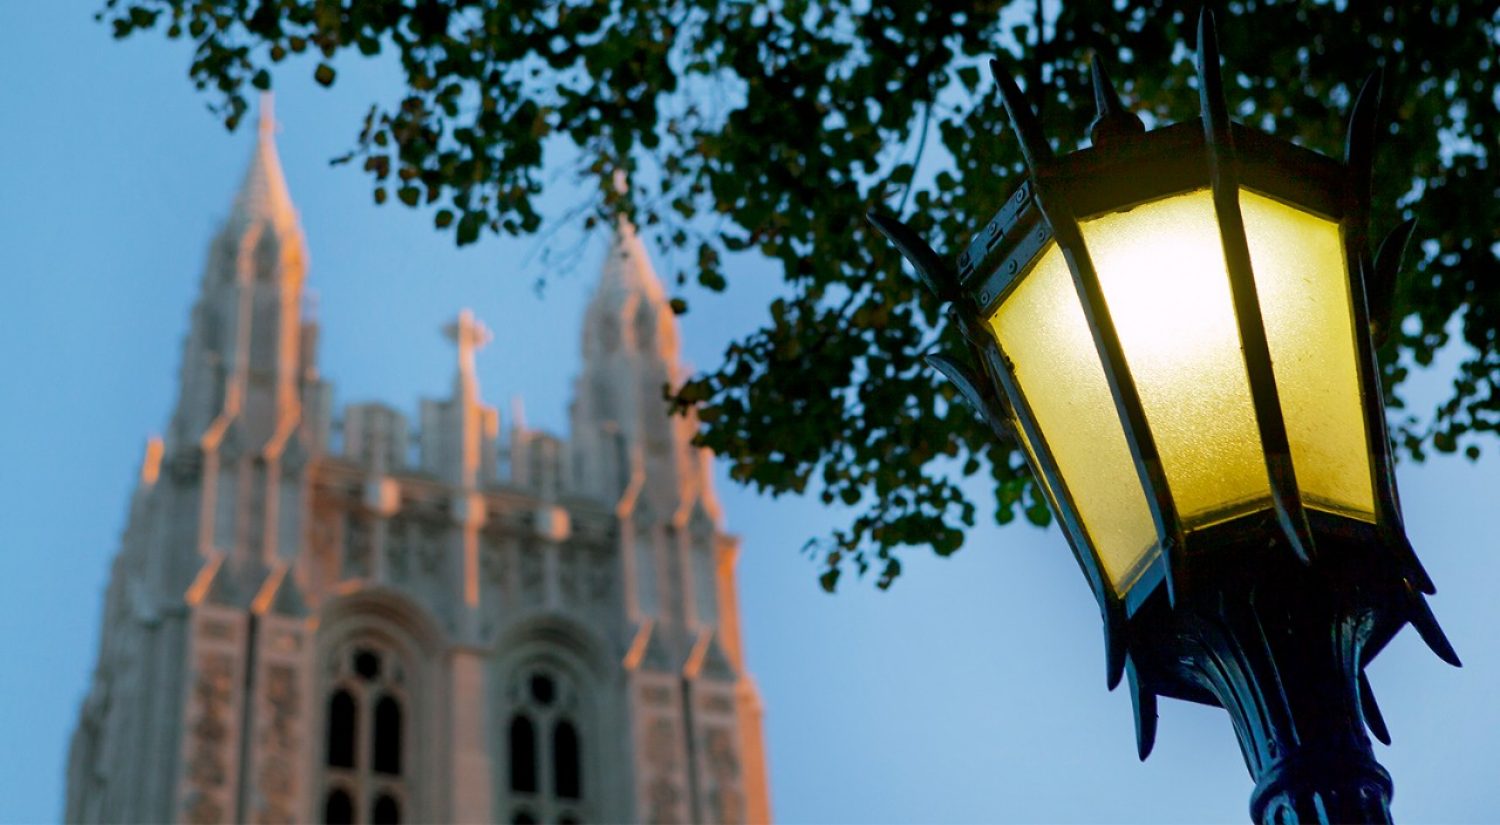 Gasson tower with lamp